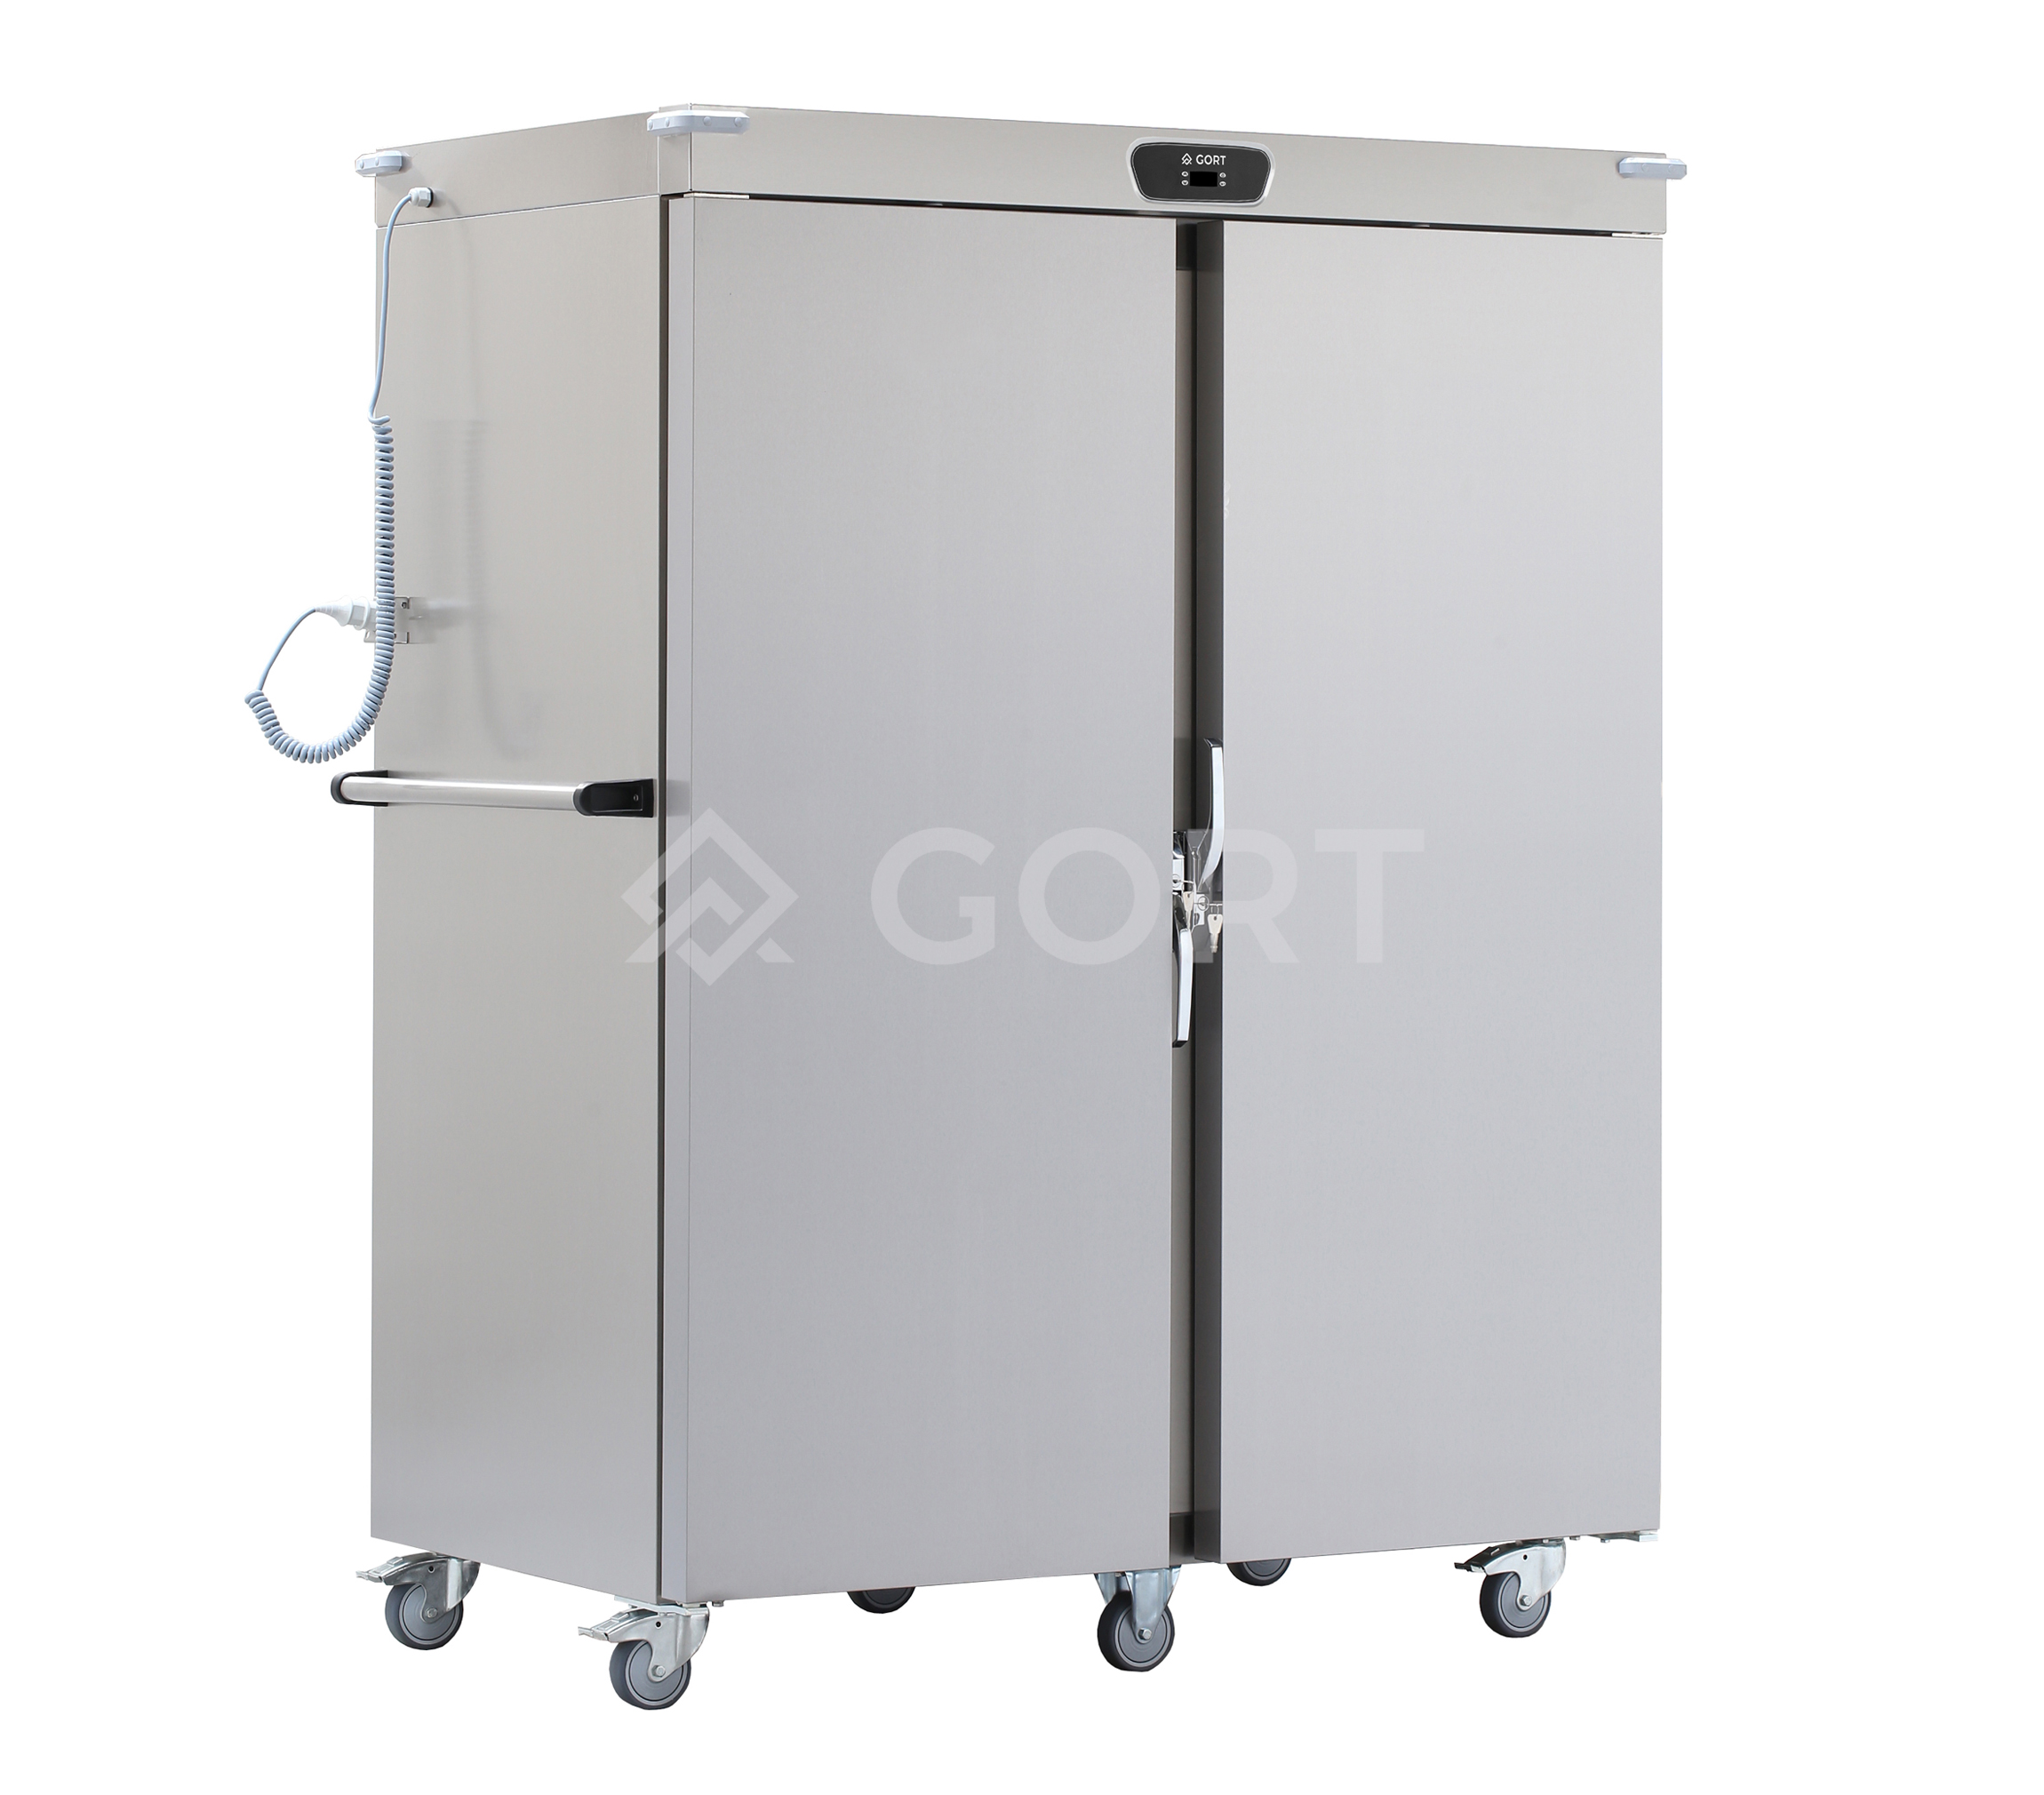 Banquet heated cabinet, double